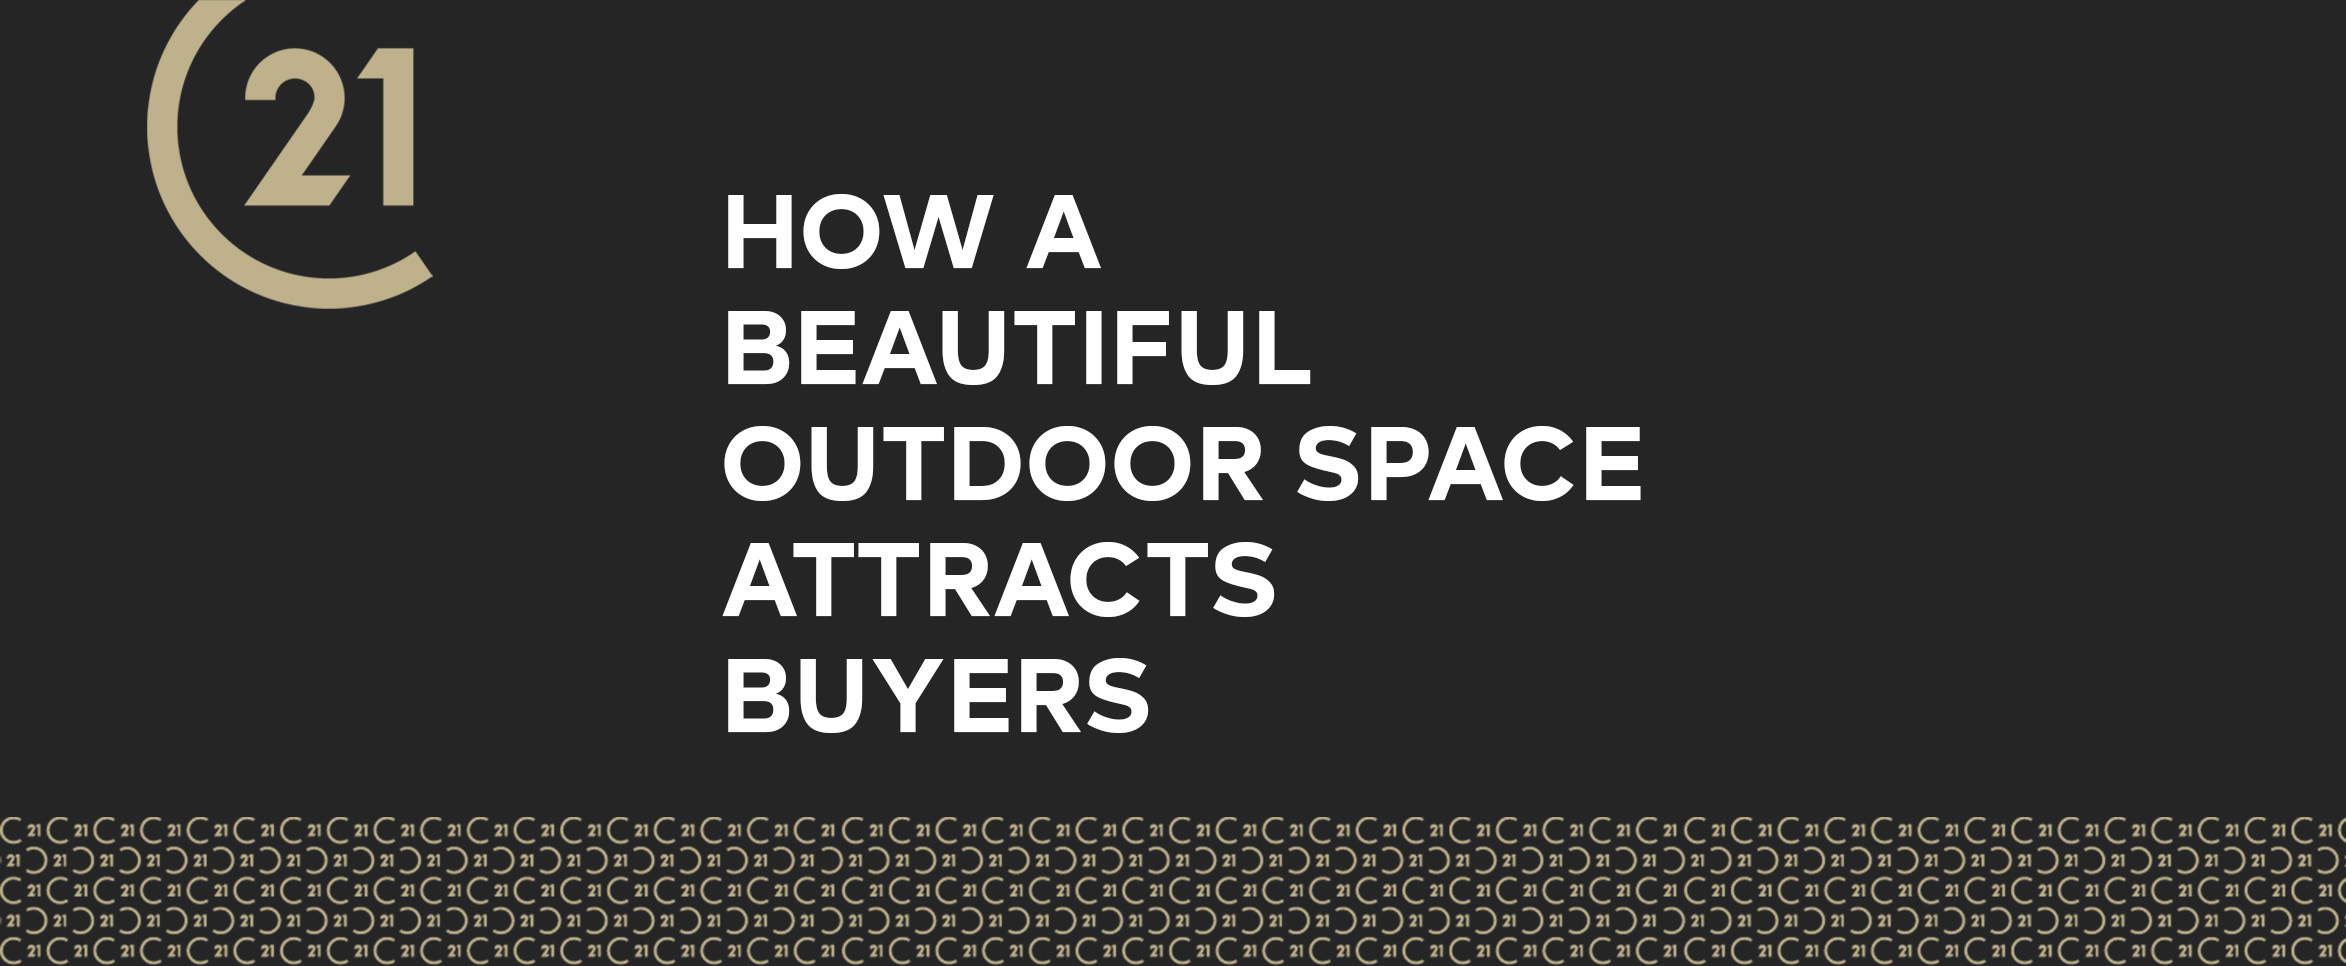 How a Beautiful Outdoor Space Attracts Buyers